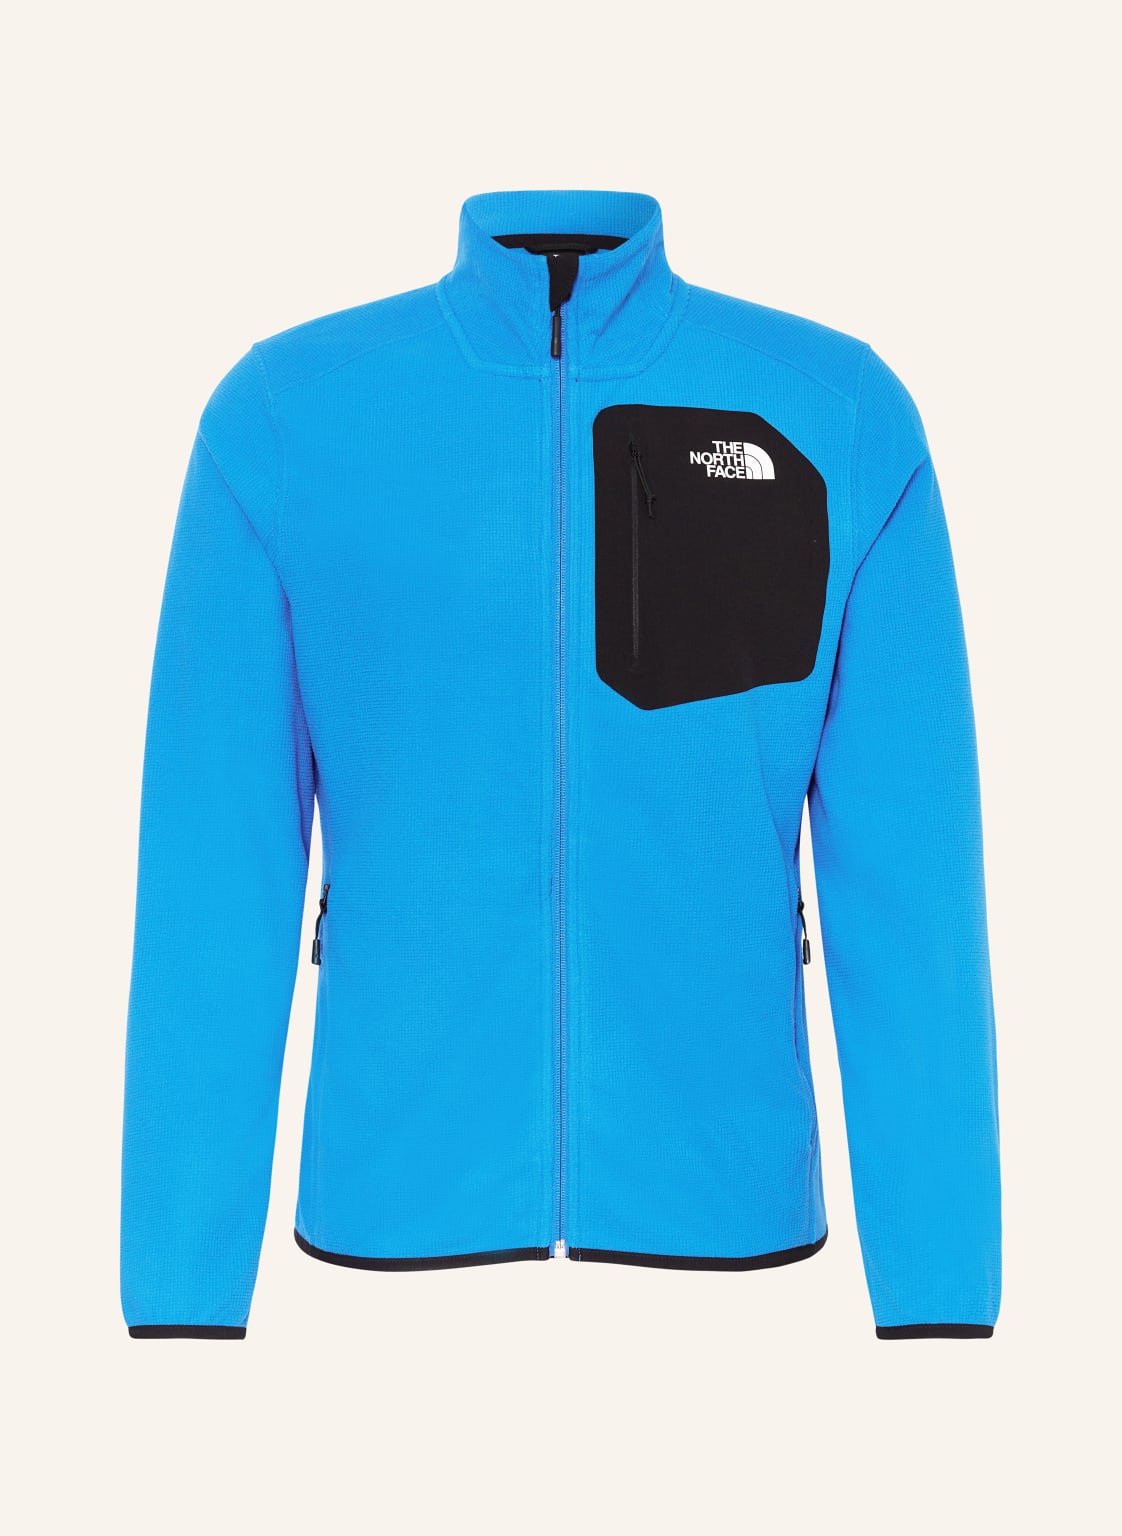 The North Face Fleecejacke Experit blau von The North Face